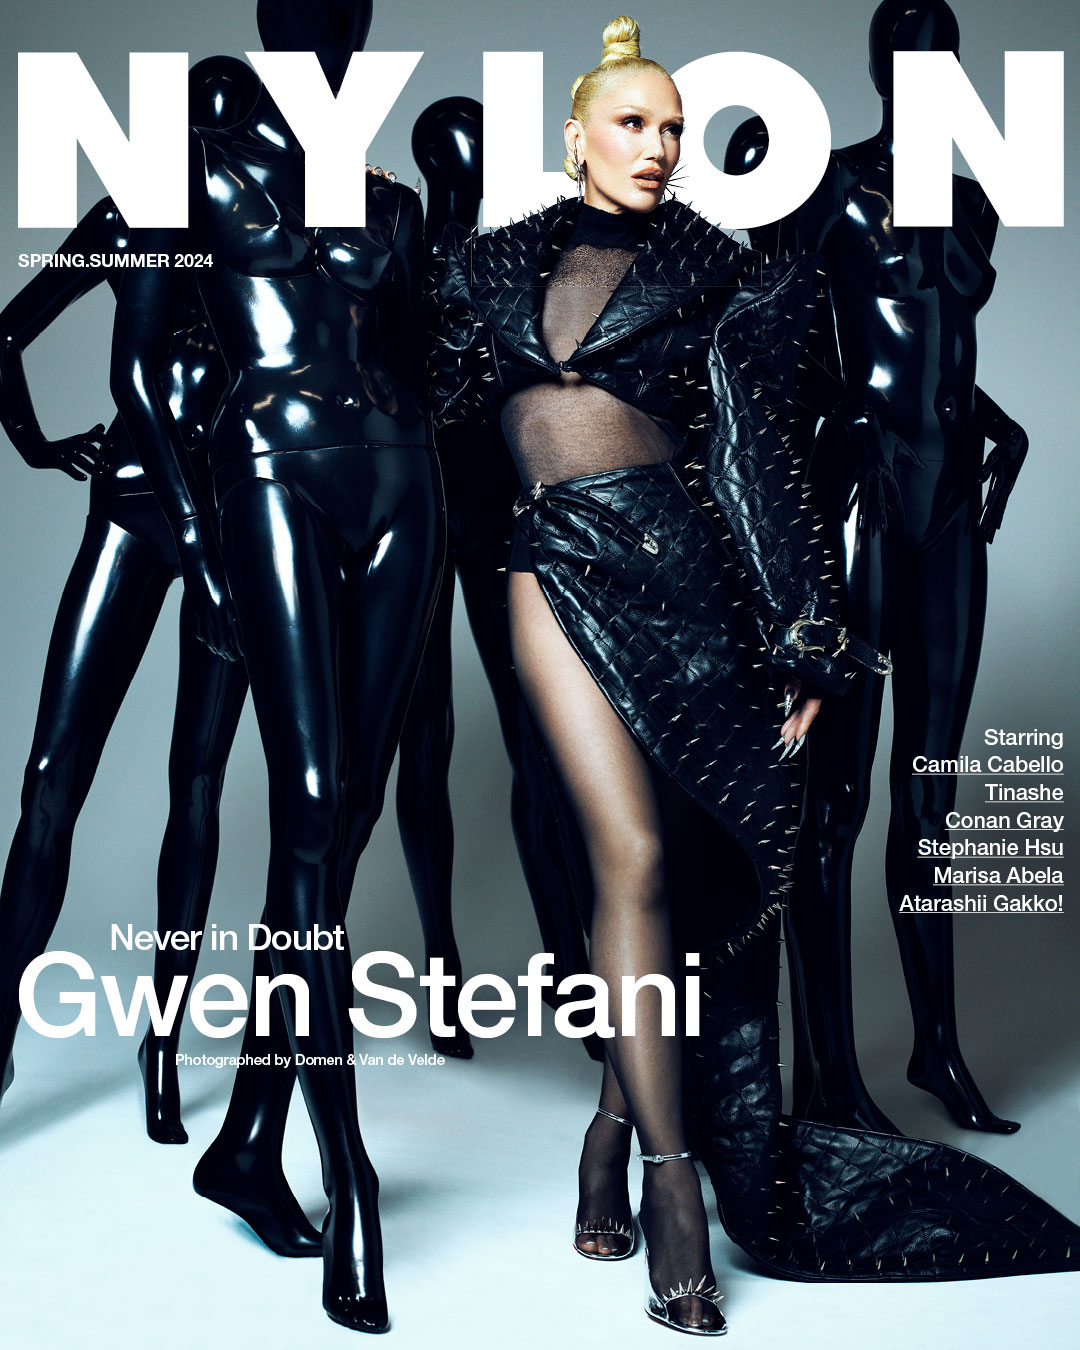 The star spoke to NYLON, and posed for several high-fashion photos